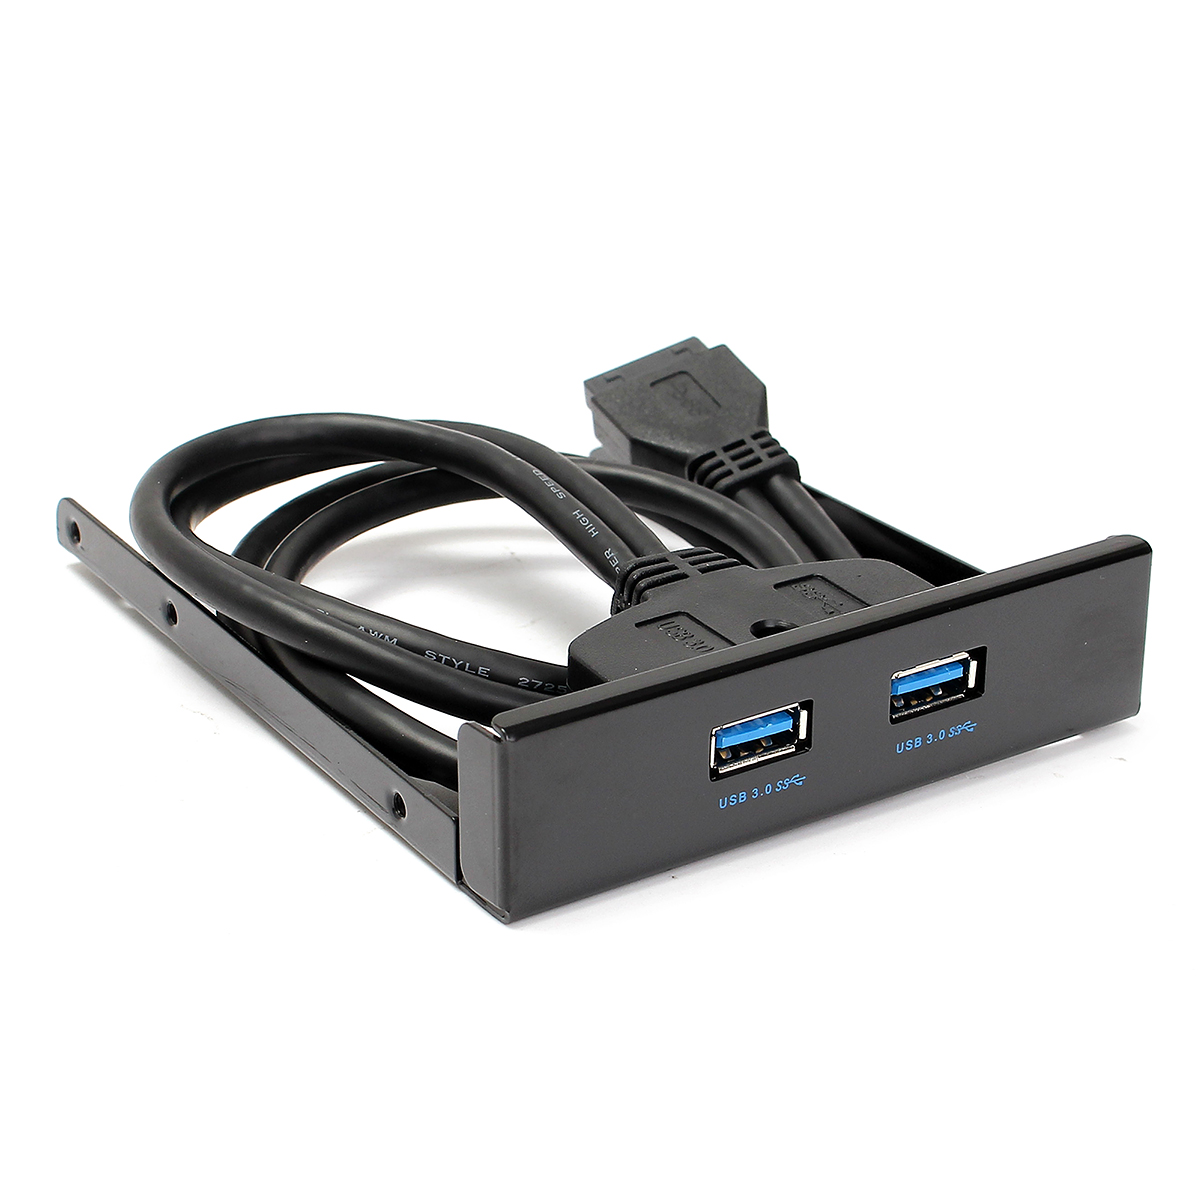 35quot-PC-Computer-Case-Front-Panel-2-Port-USB-30-Floppy-Drive-Bay-with-Holder-for-25-quotHDD-SSD-1328028